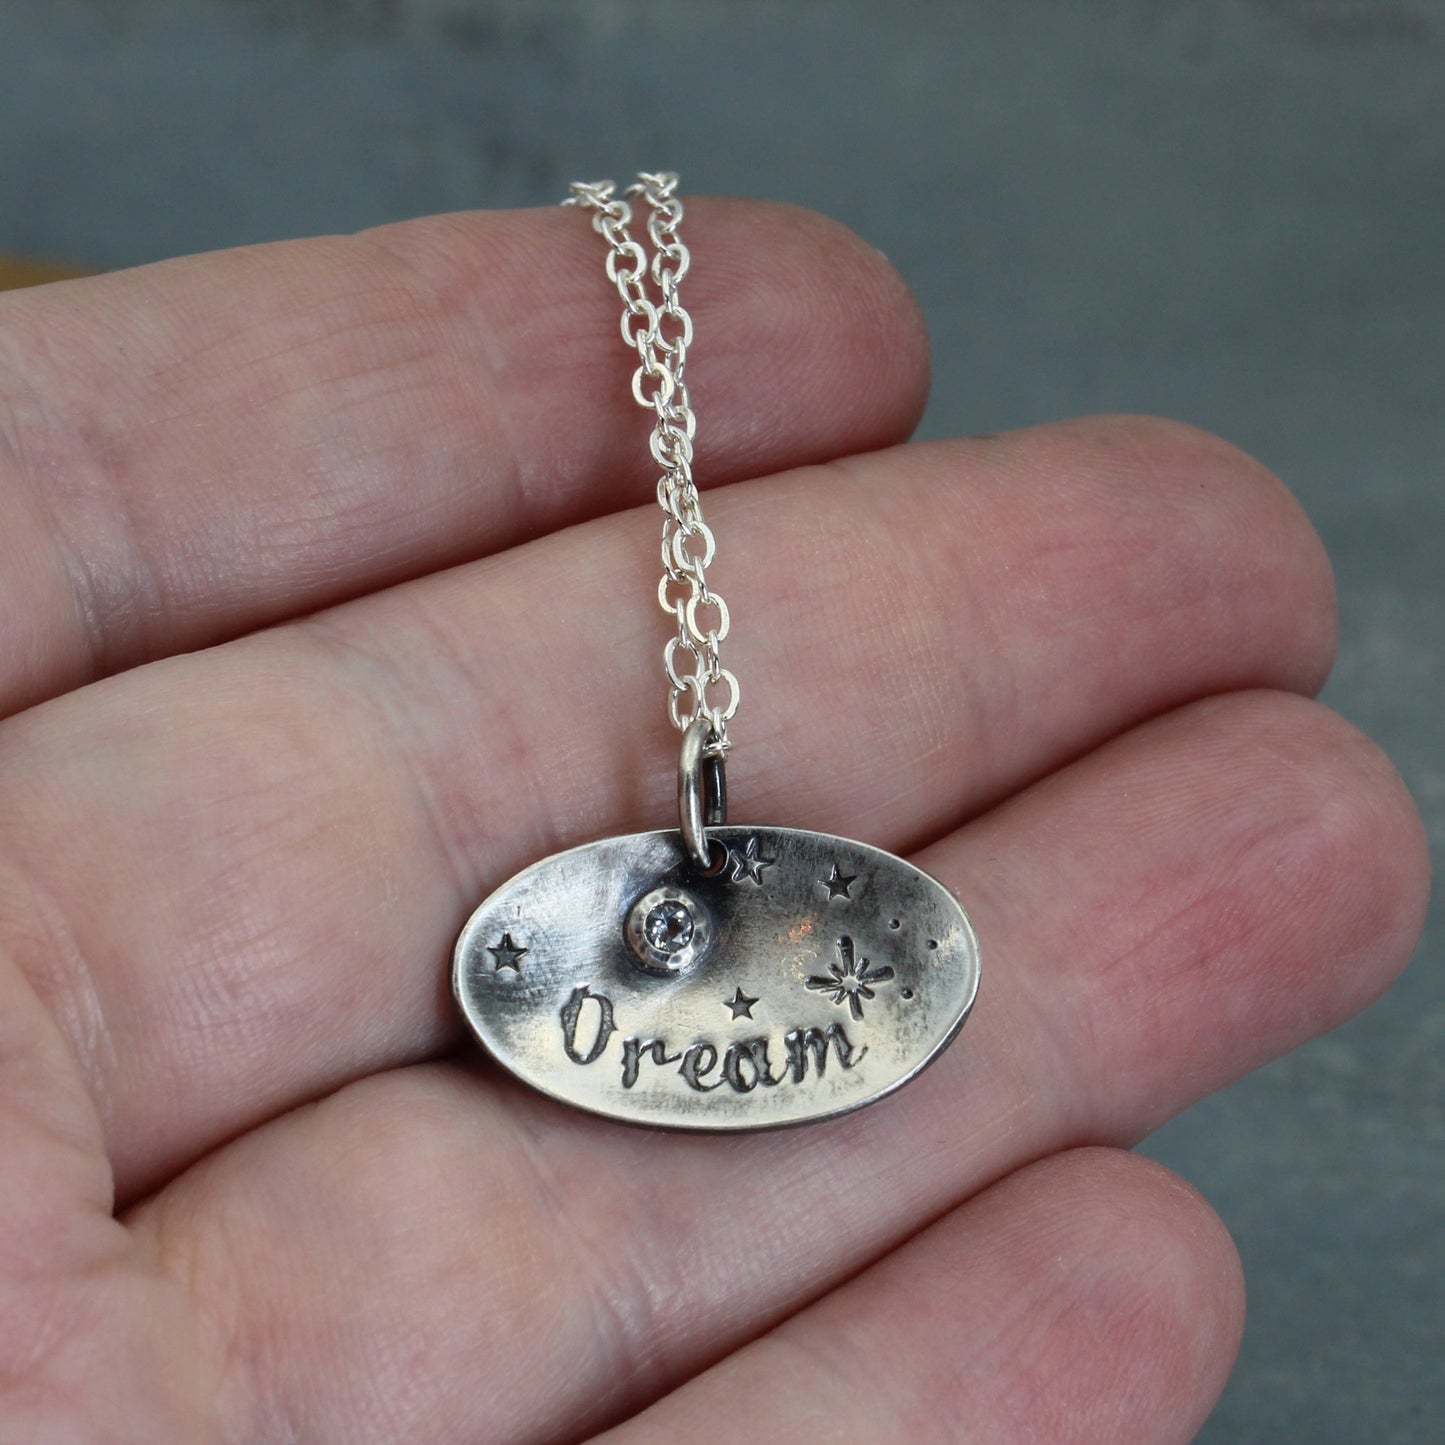 Dream necklace on hand